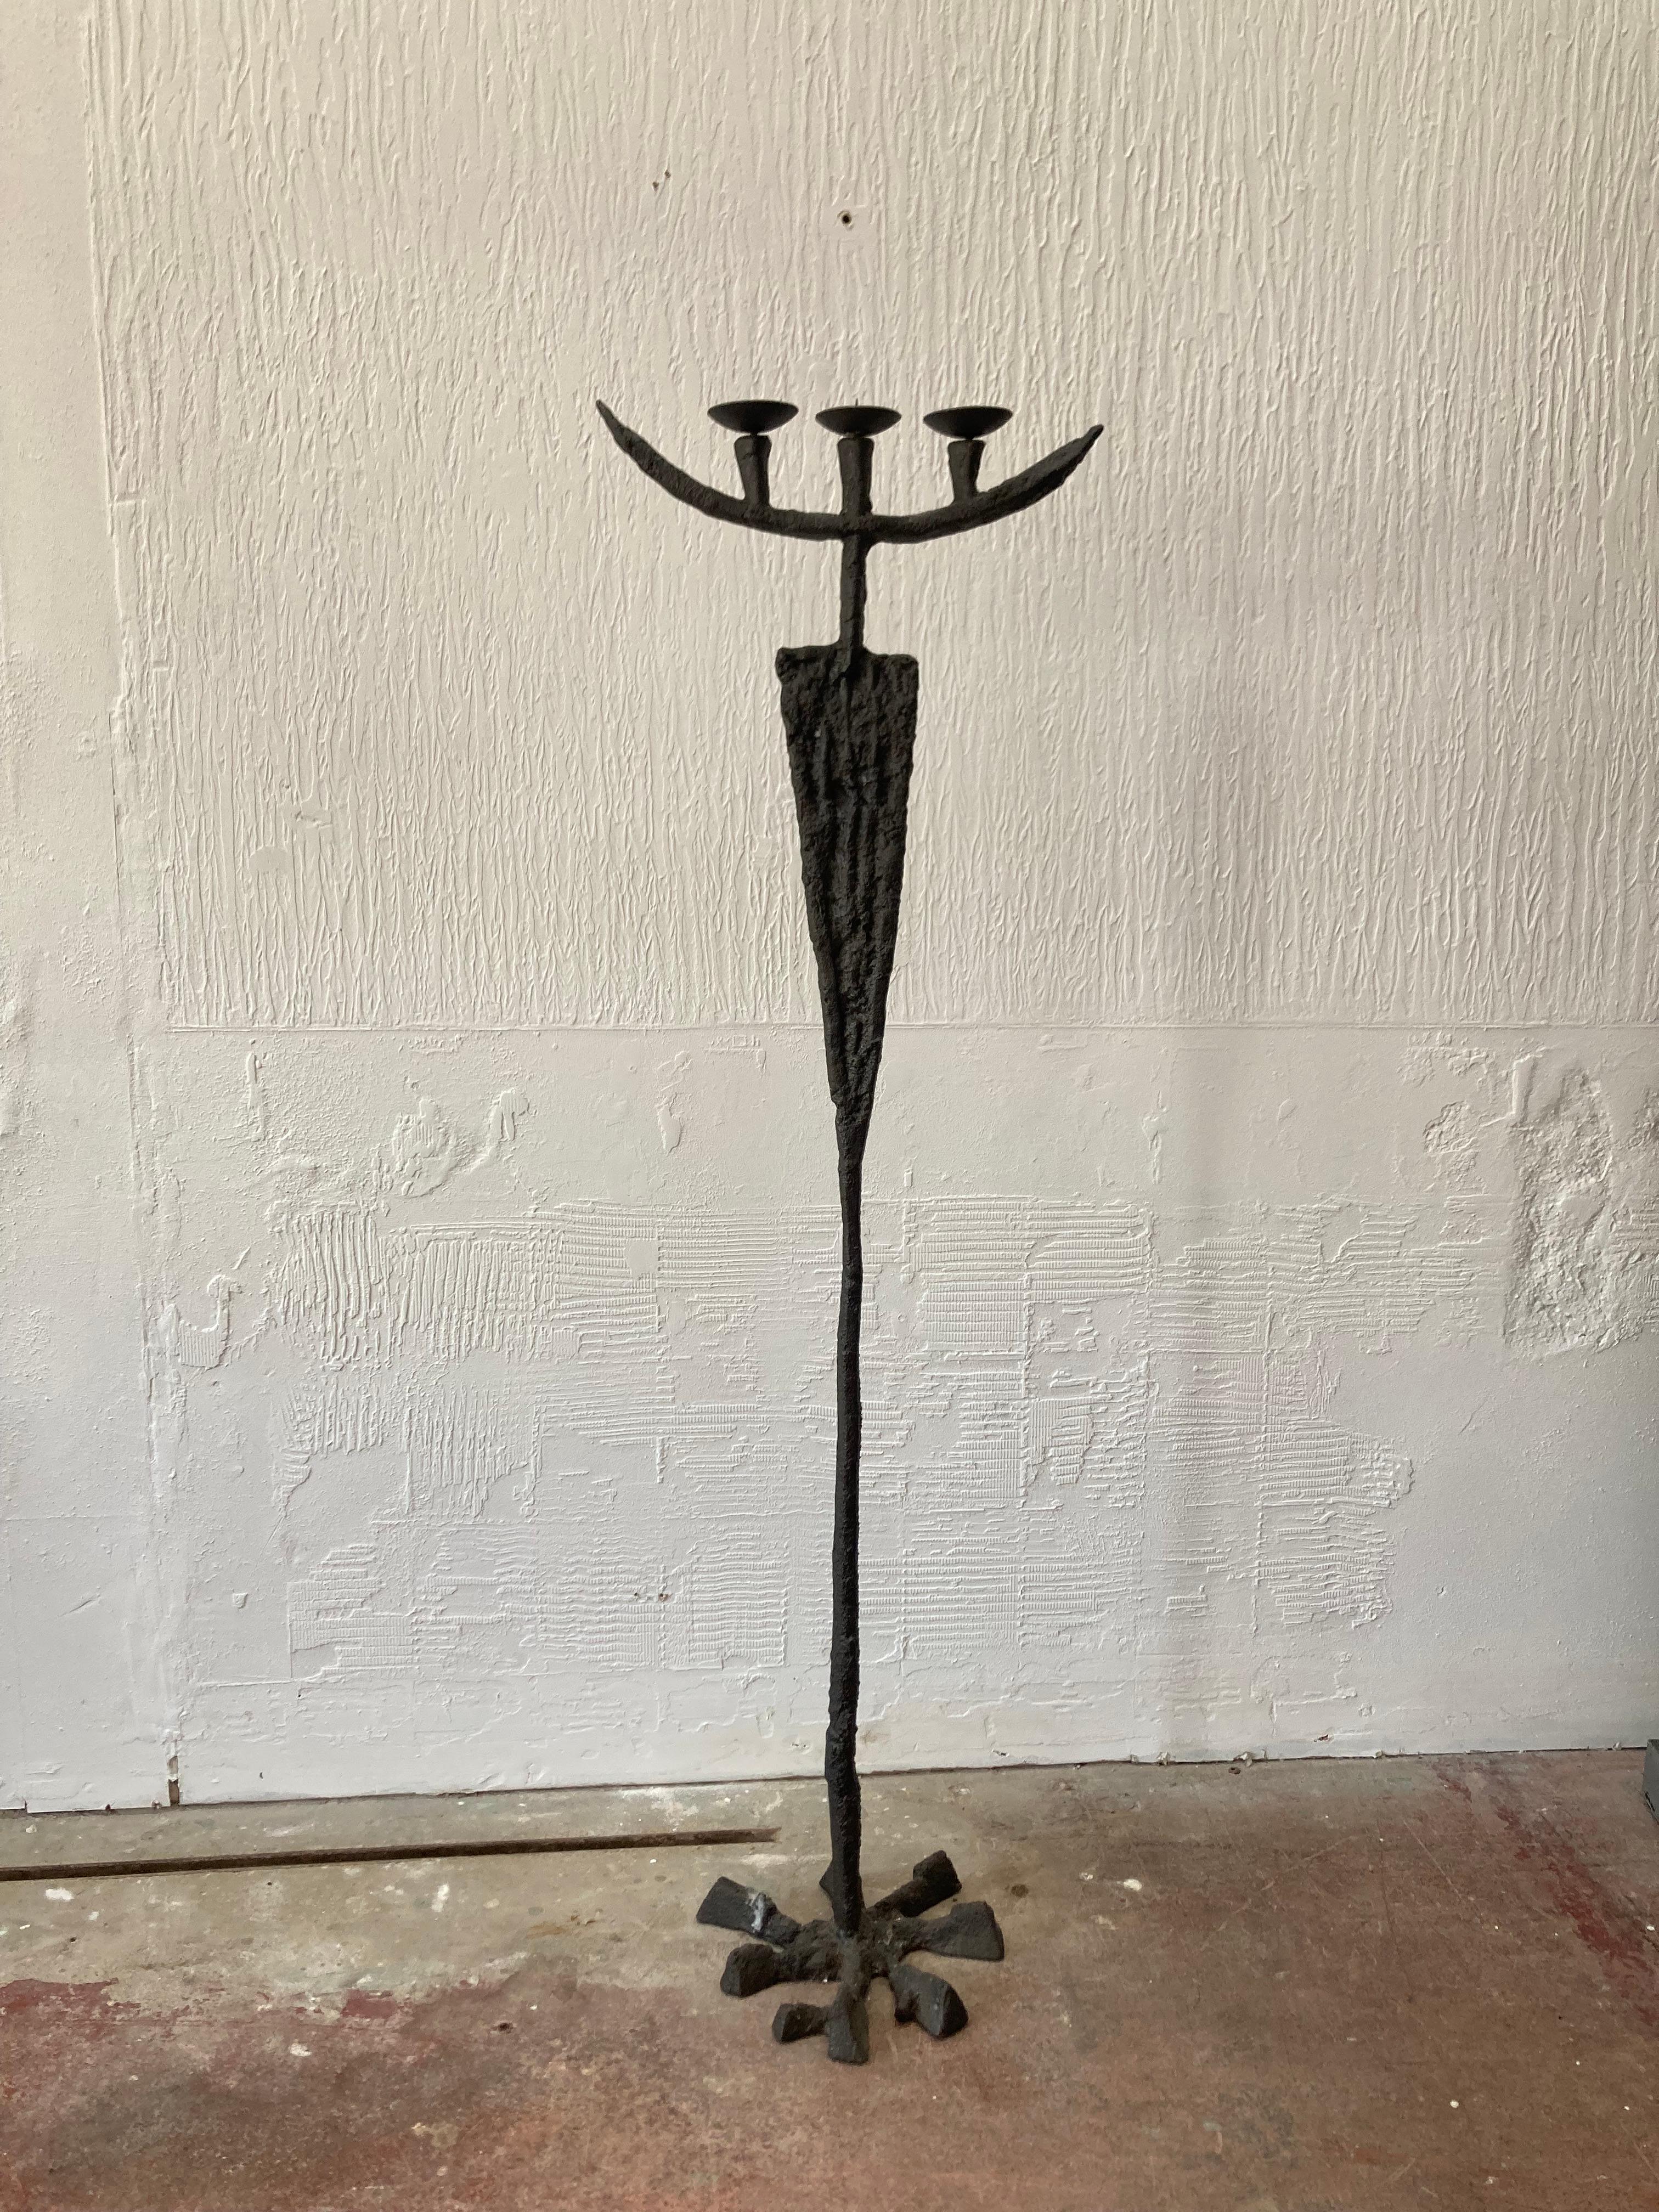 This is a stunning Brutalist candle stand, floor standing. The heavy iron framework supports a wonderful gnarled bronzed finish. It has a tall and strong Brutalist presence.
This is clearly artist made, you can really feel the connection between the